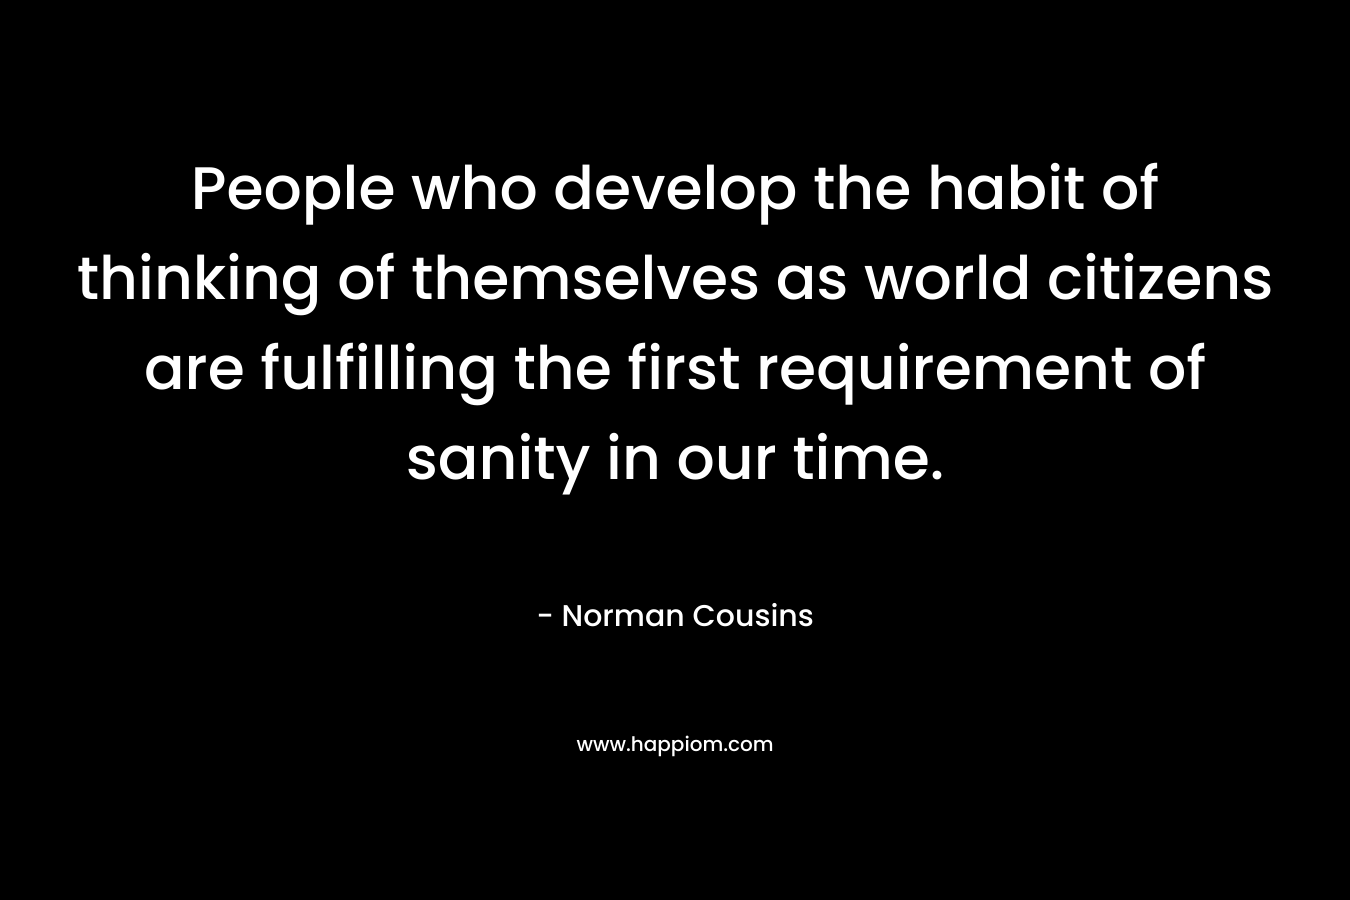 People who develop the habit of thinking of themselves as world citizens are fulfilling the first requirement of sanity in our time. – Norman Cousins